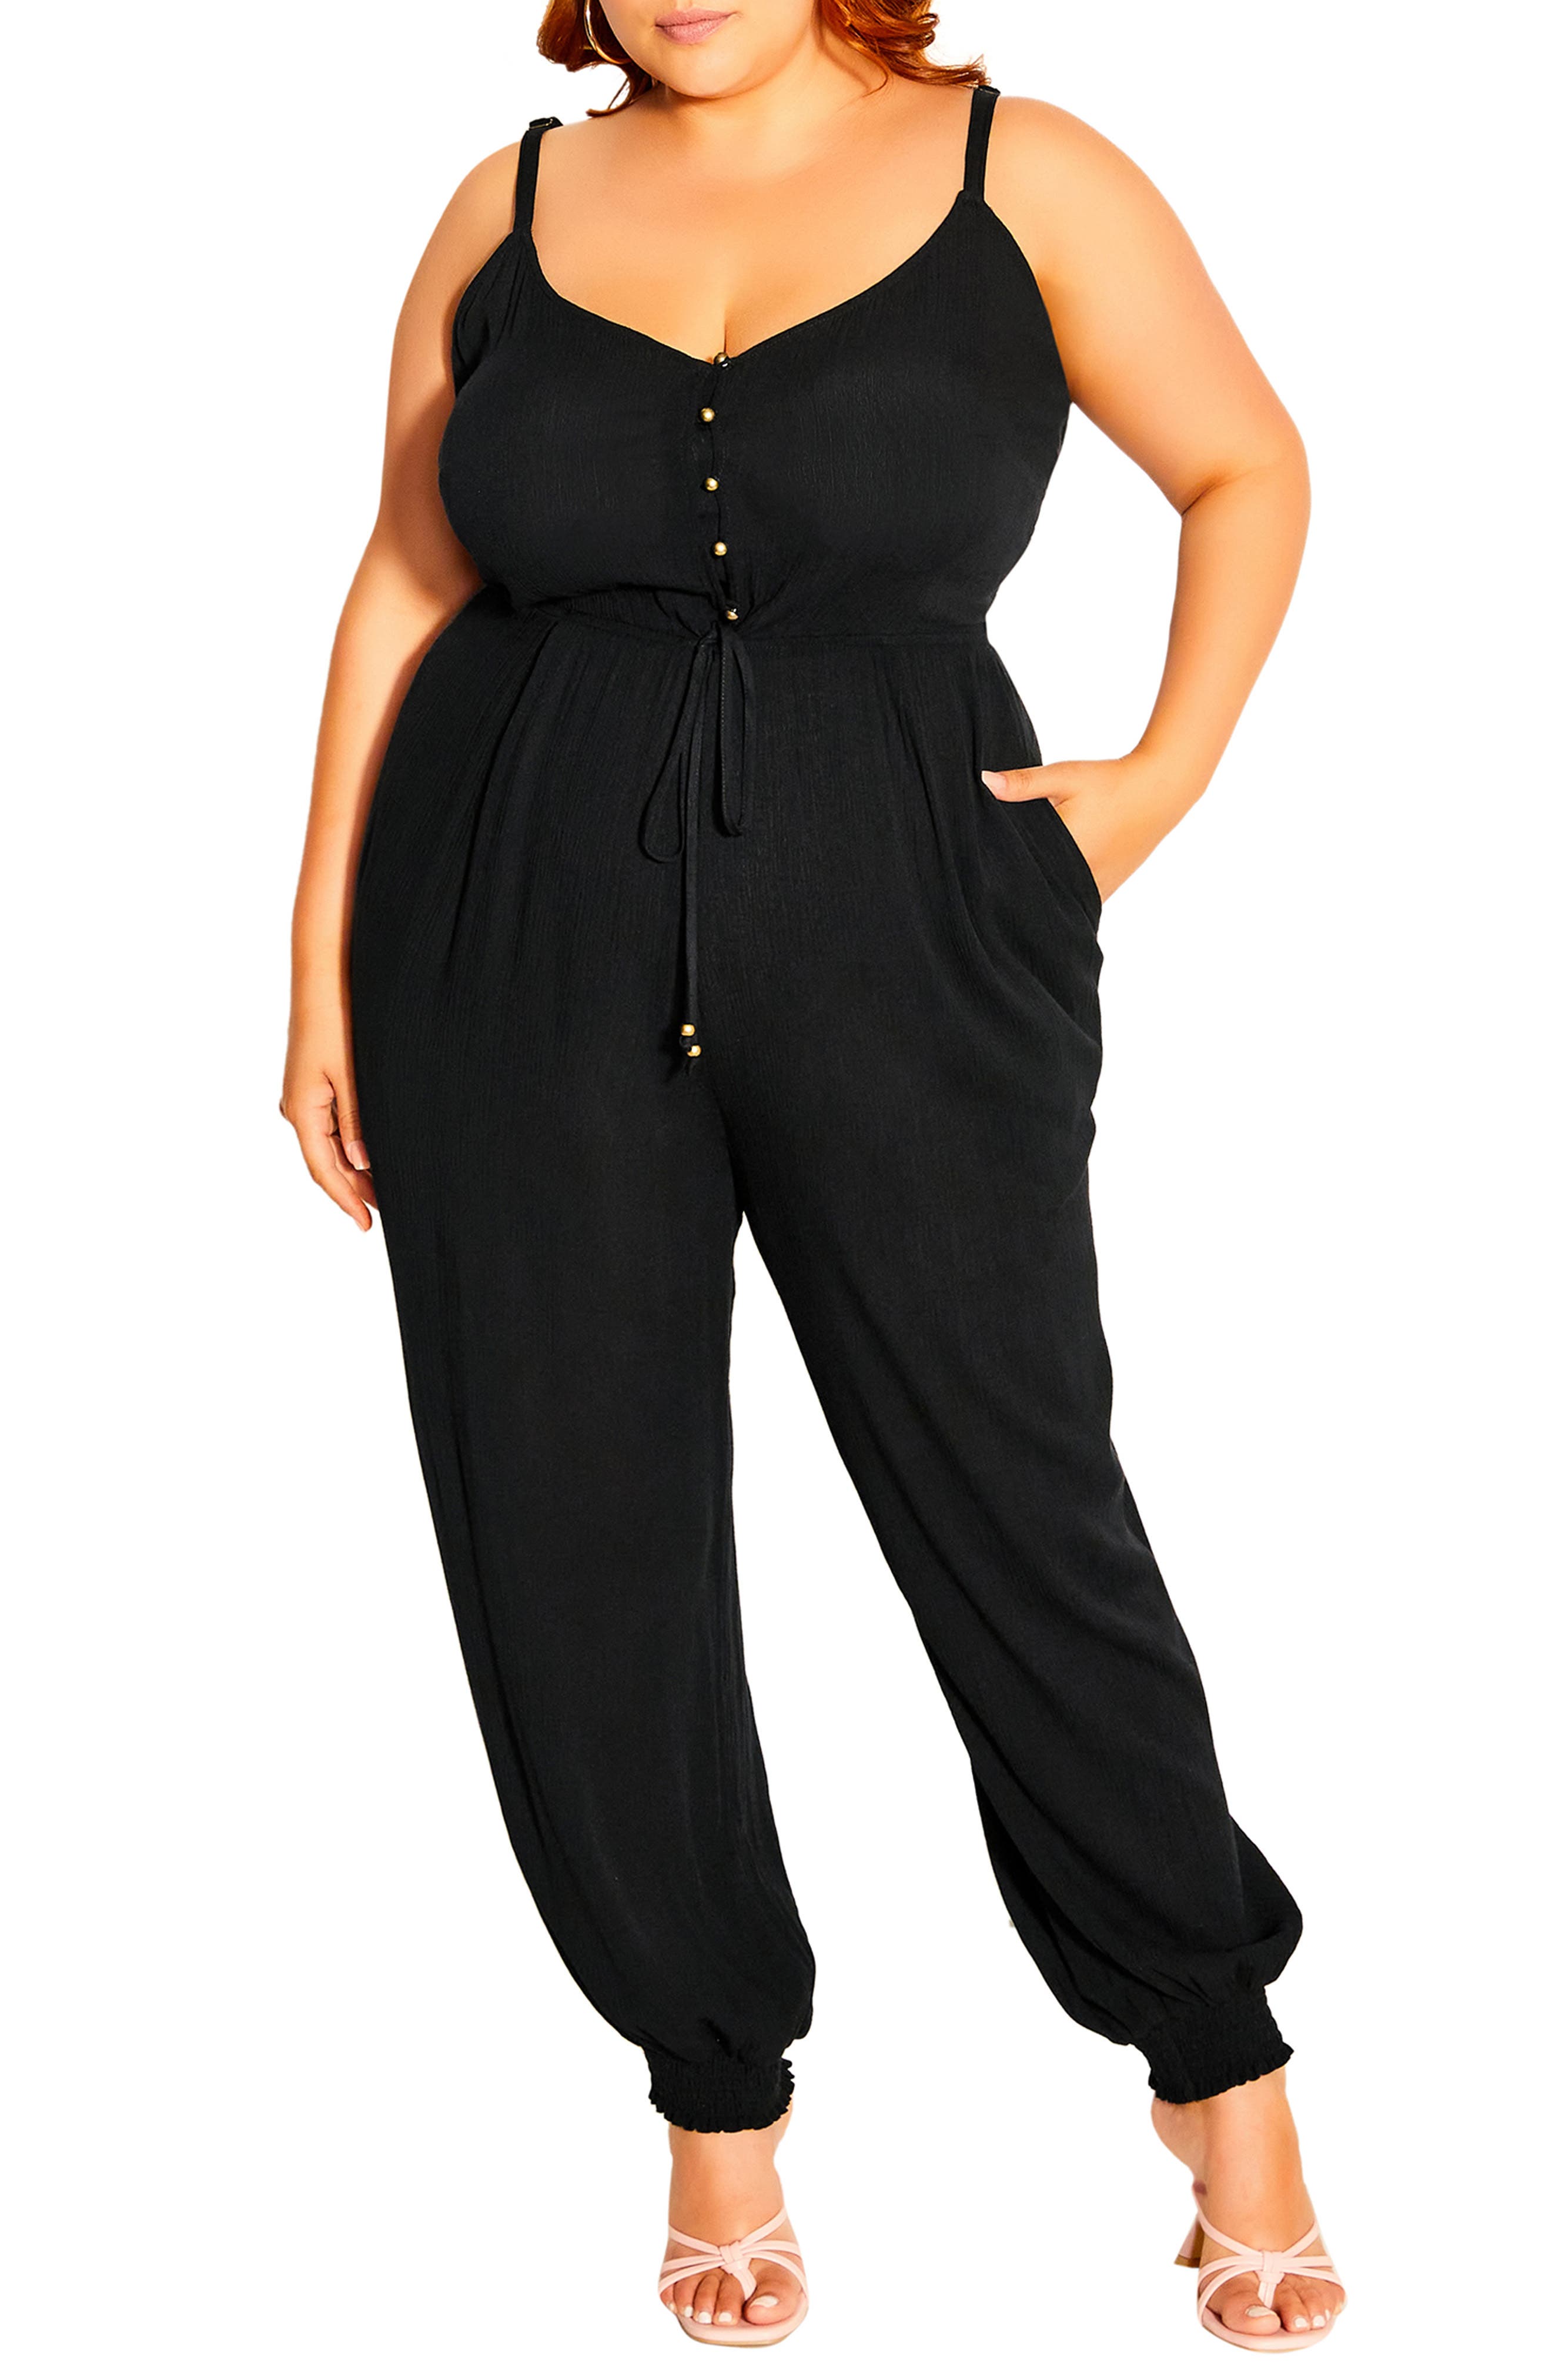 one size Black and White  Romper Boho Jumpsuit available for plus size